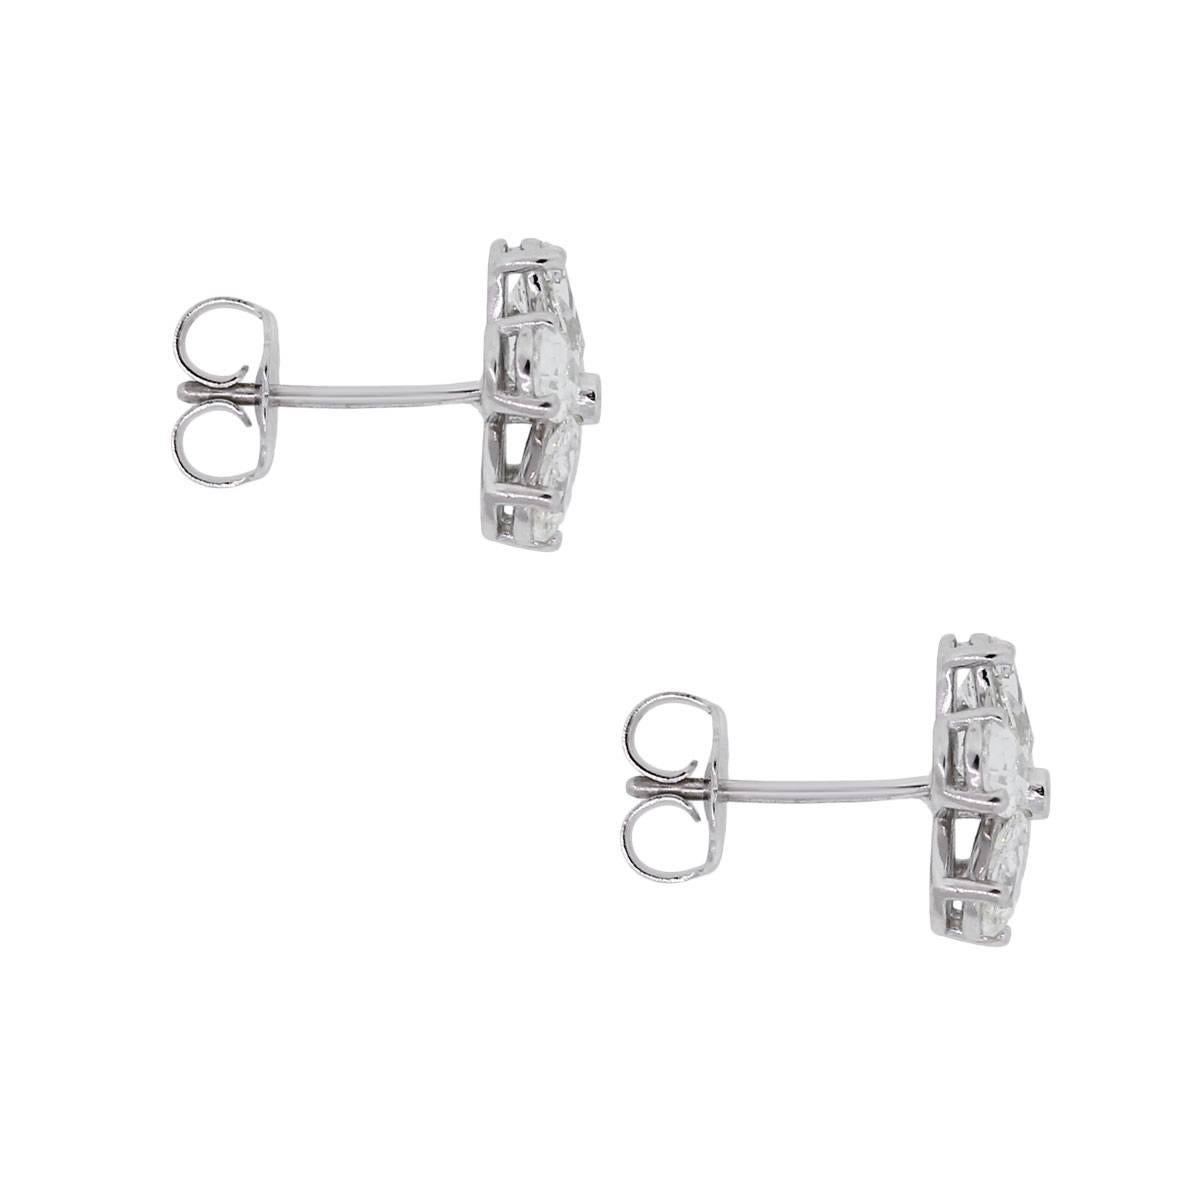 Material: 14k white gold
Diamond Details: Approximately 1.90ctw of pear shape and round brilliant diamonds. Diamonds are G/H in color and SI in clarity
Measurements: 0.58″ x 0.40″ x 0.40″
Earring Backs: Post friction
Total Weight: 2.2g